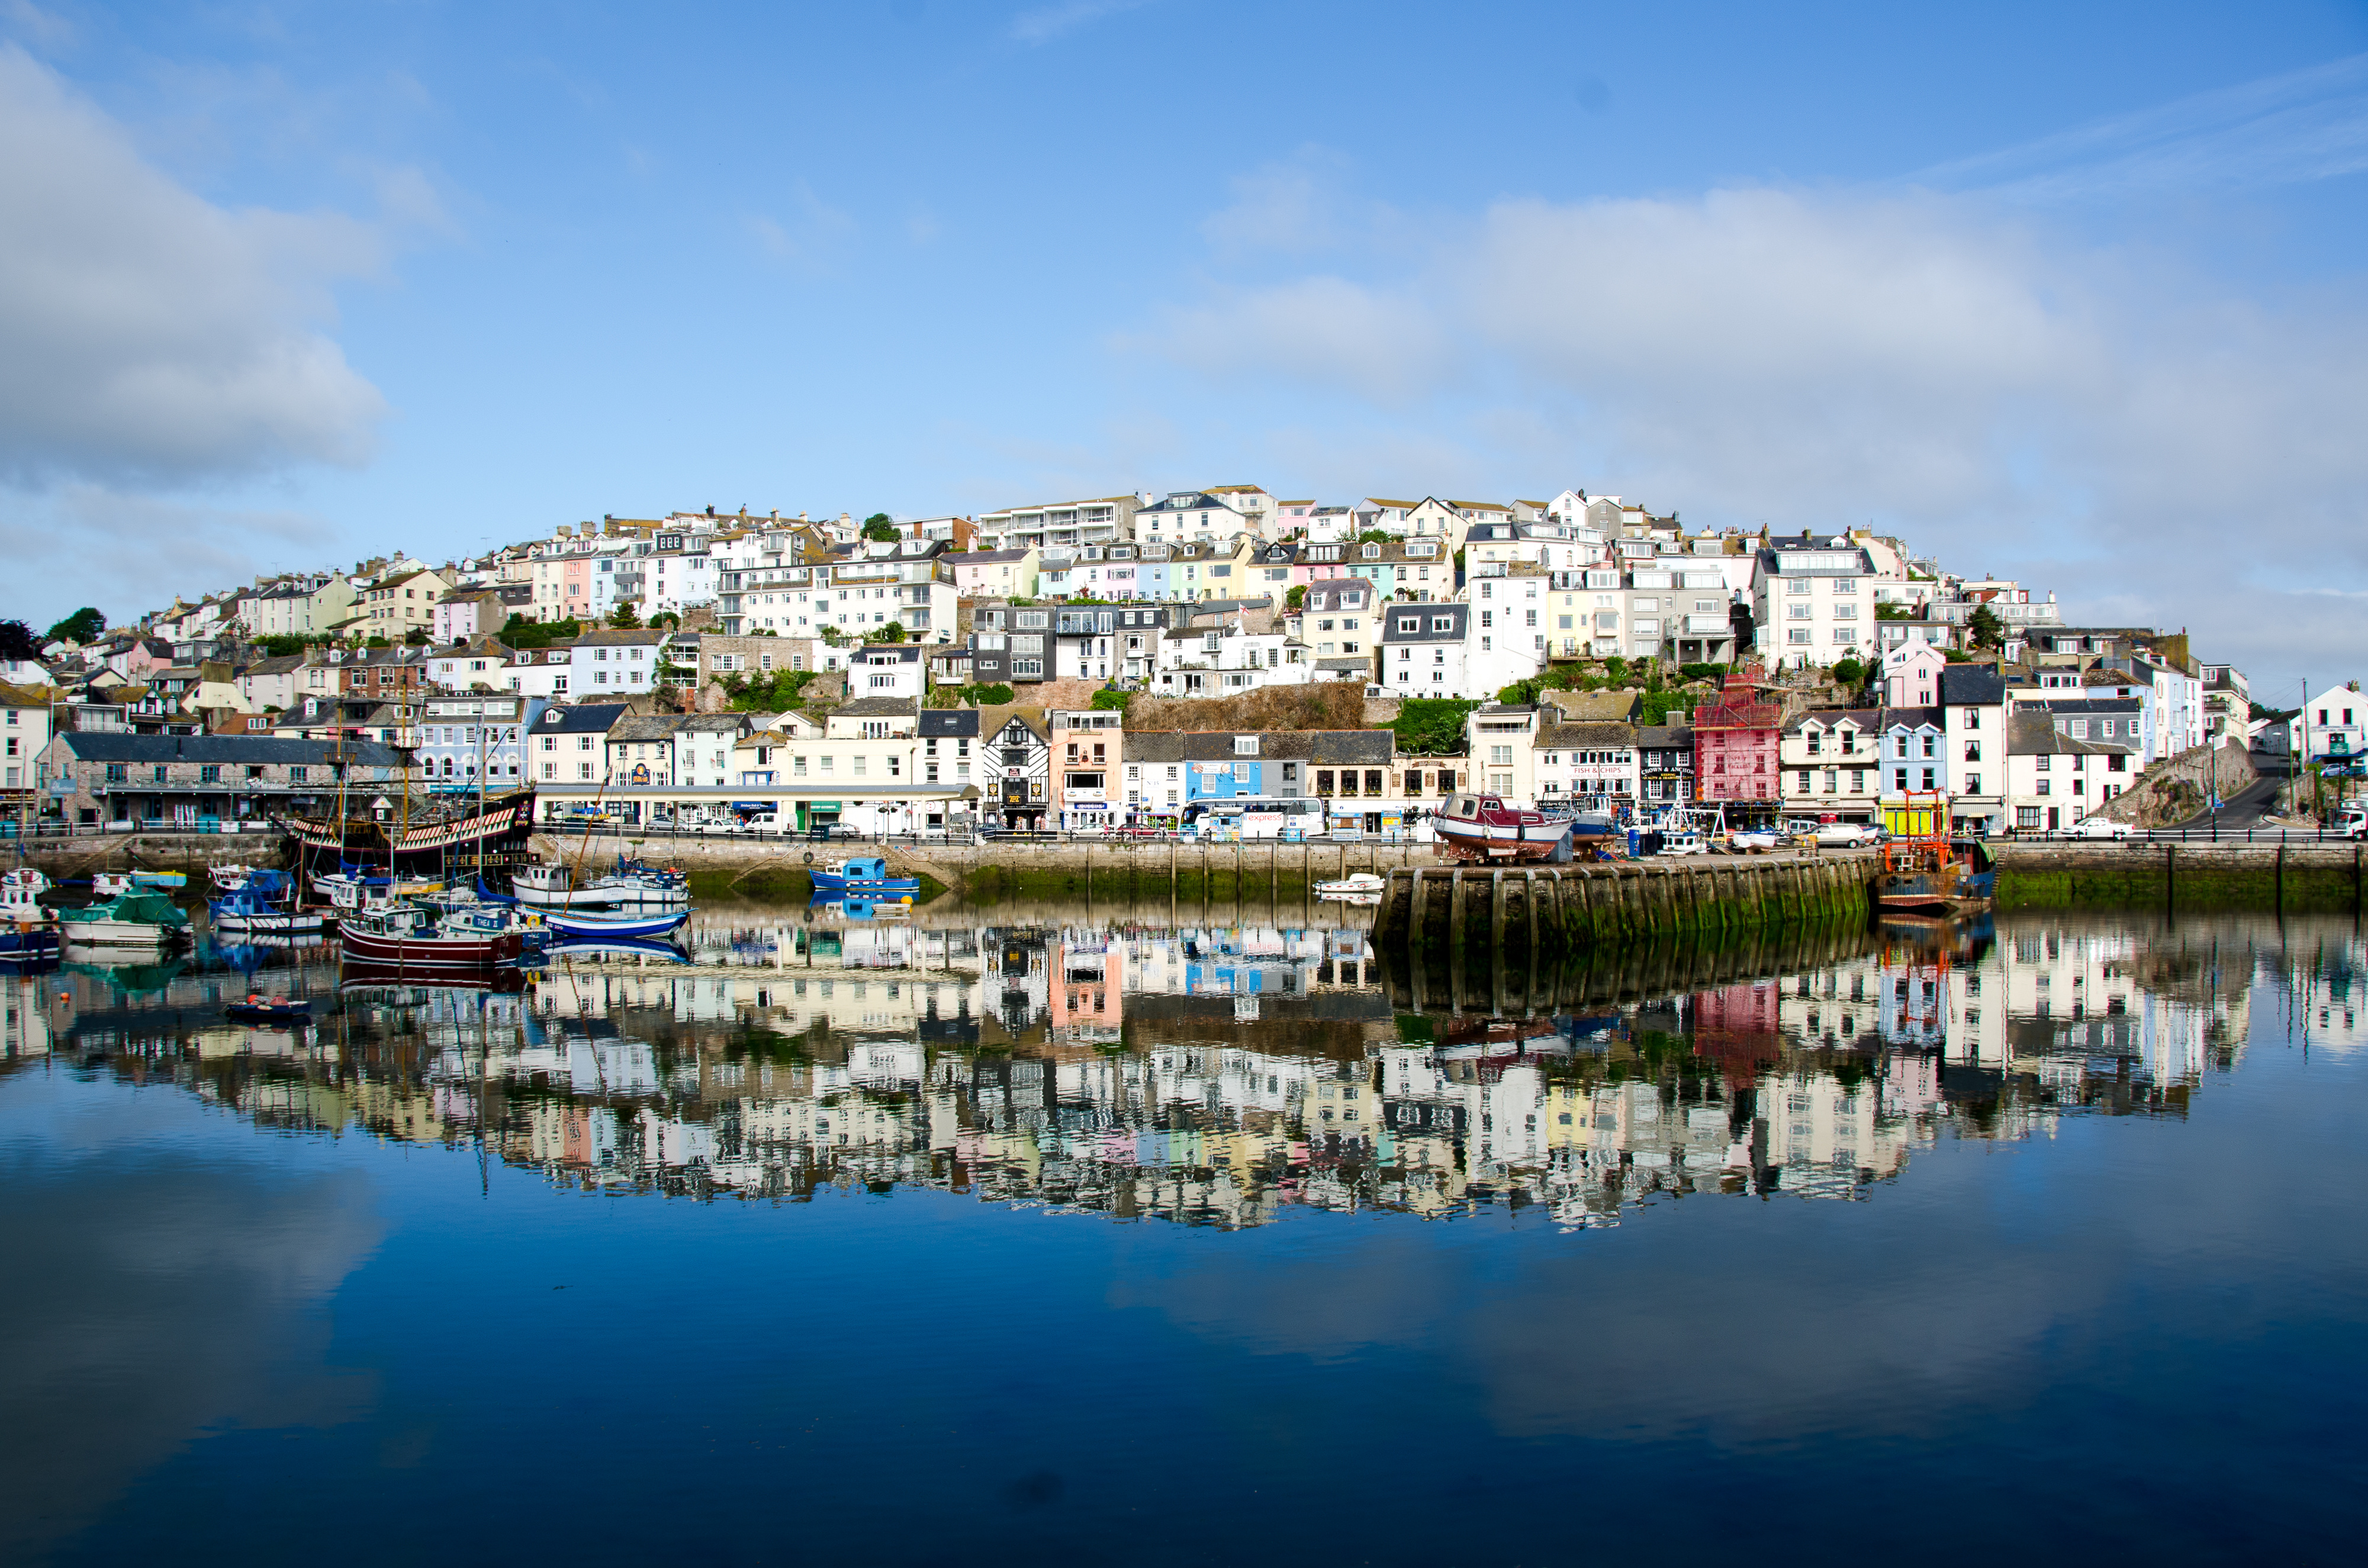 A beautiful view of Brixham Harbour in the early morning